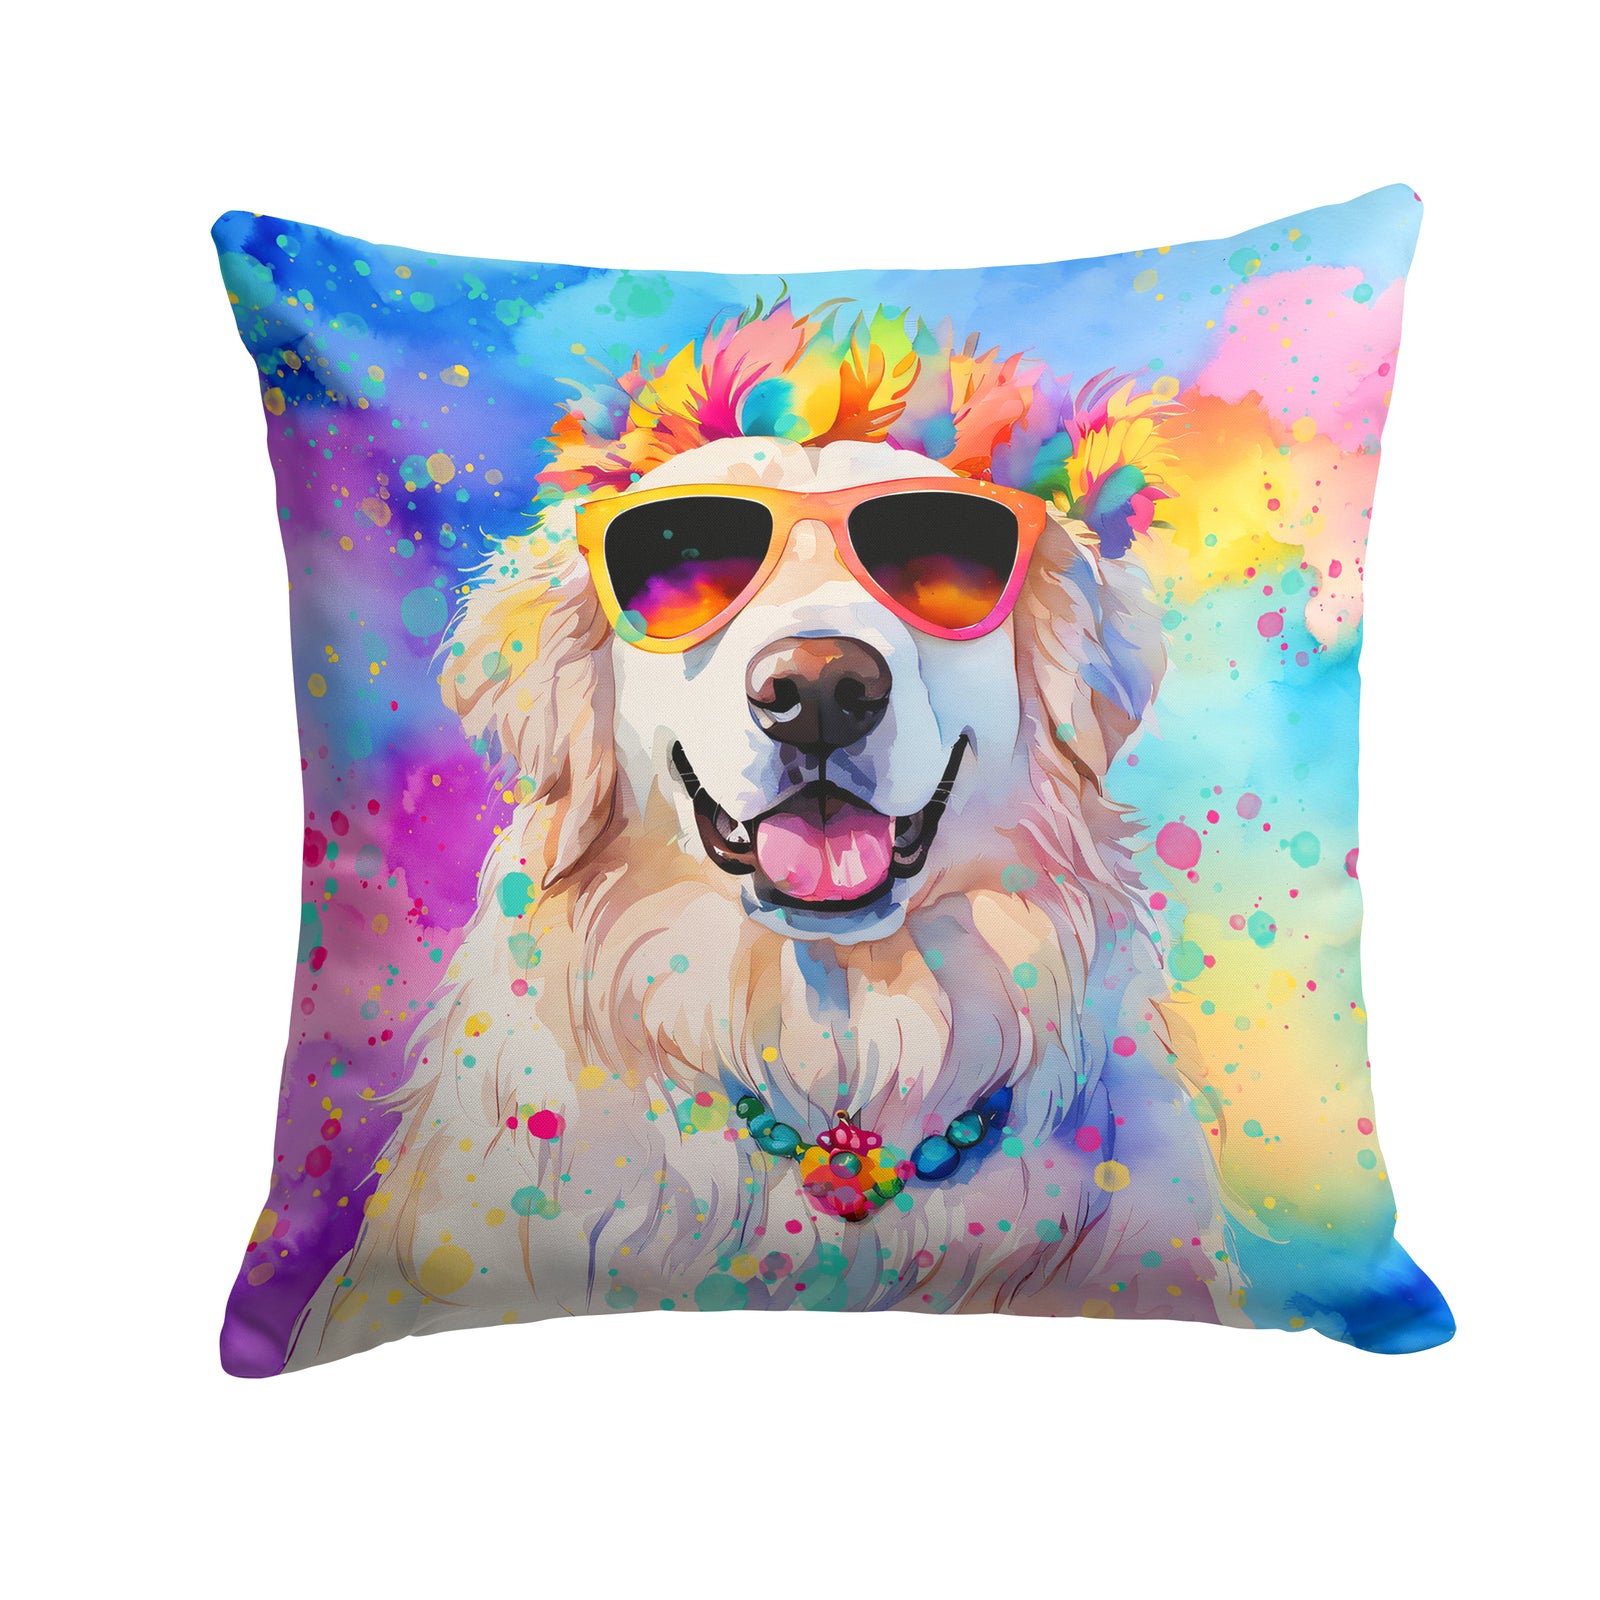 Buy this Great Pyrenees Hippie Dawg Fabric Decorative Pillow